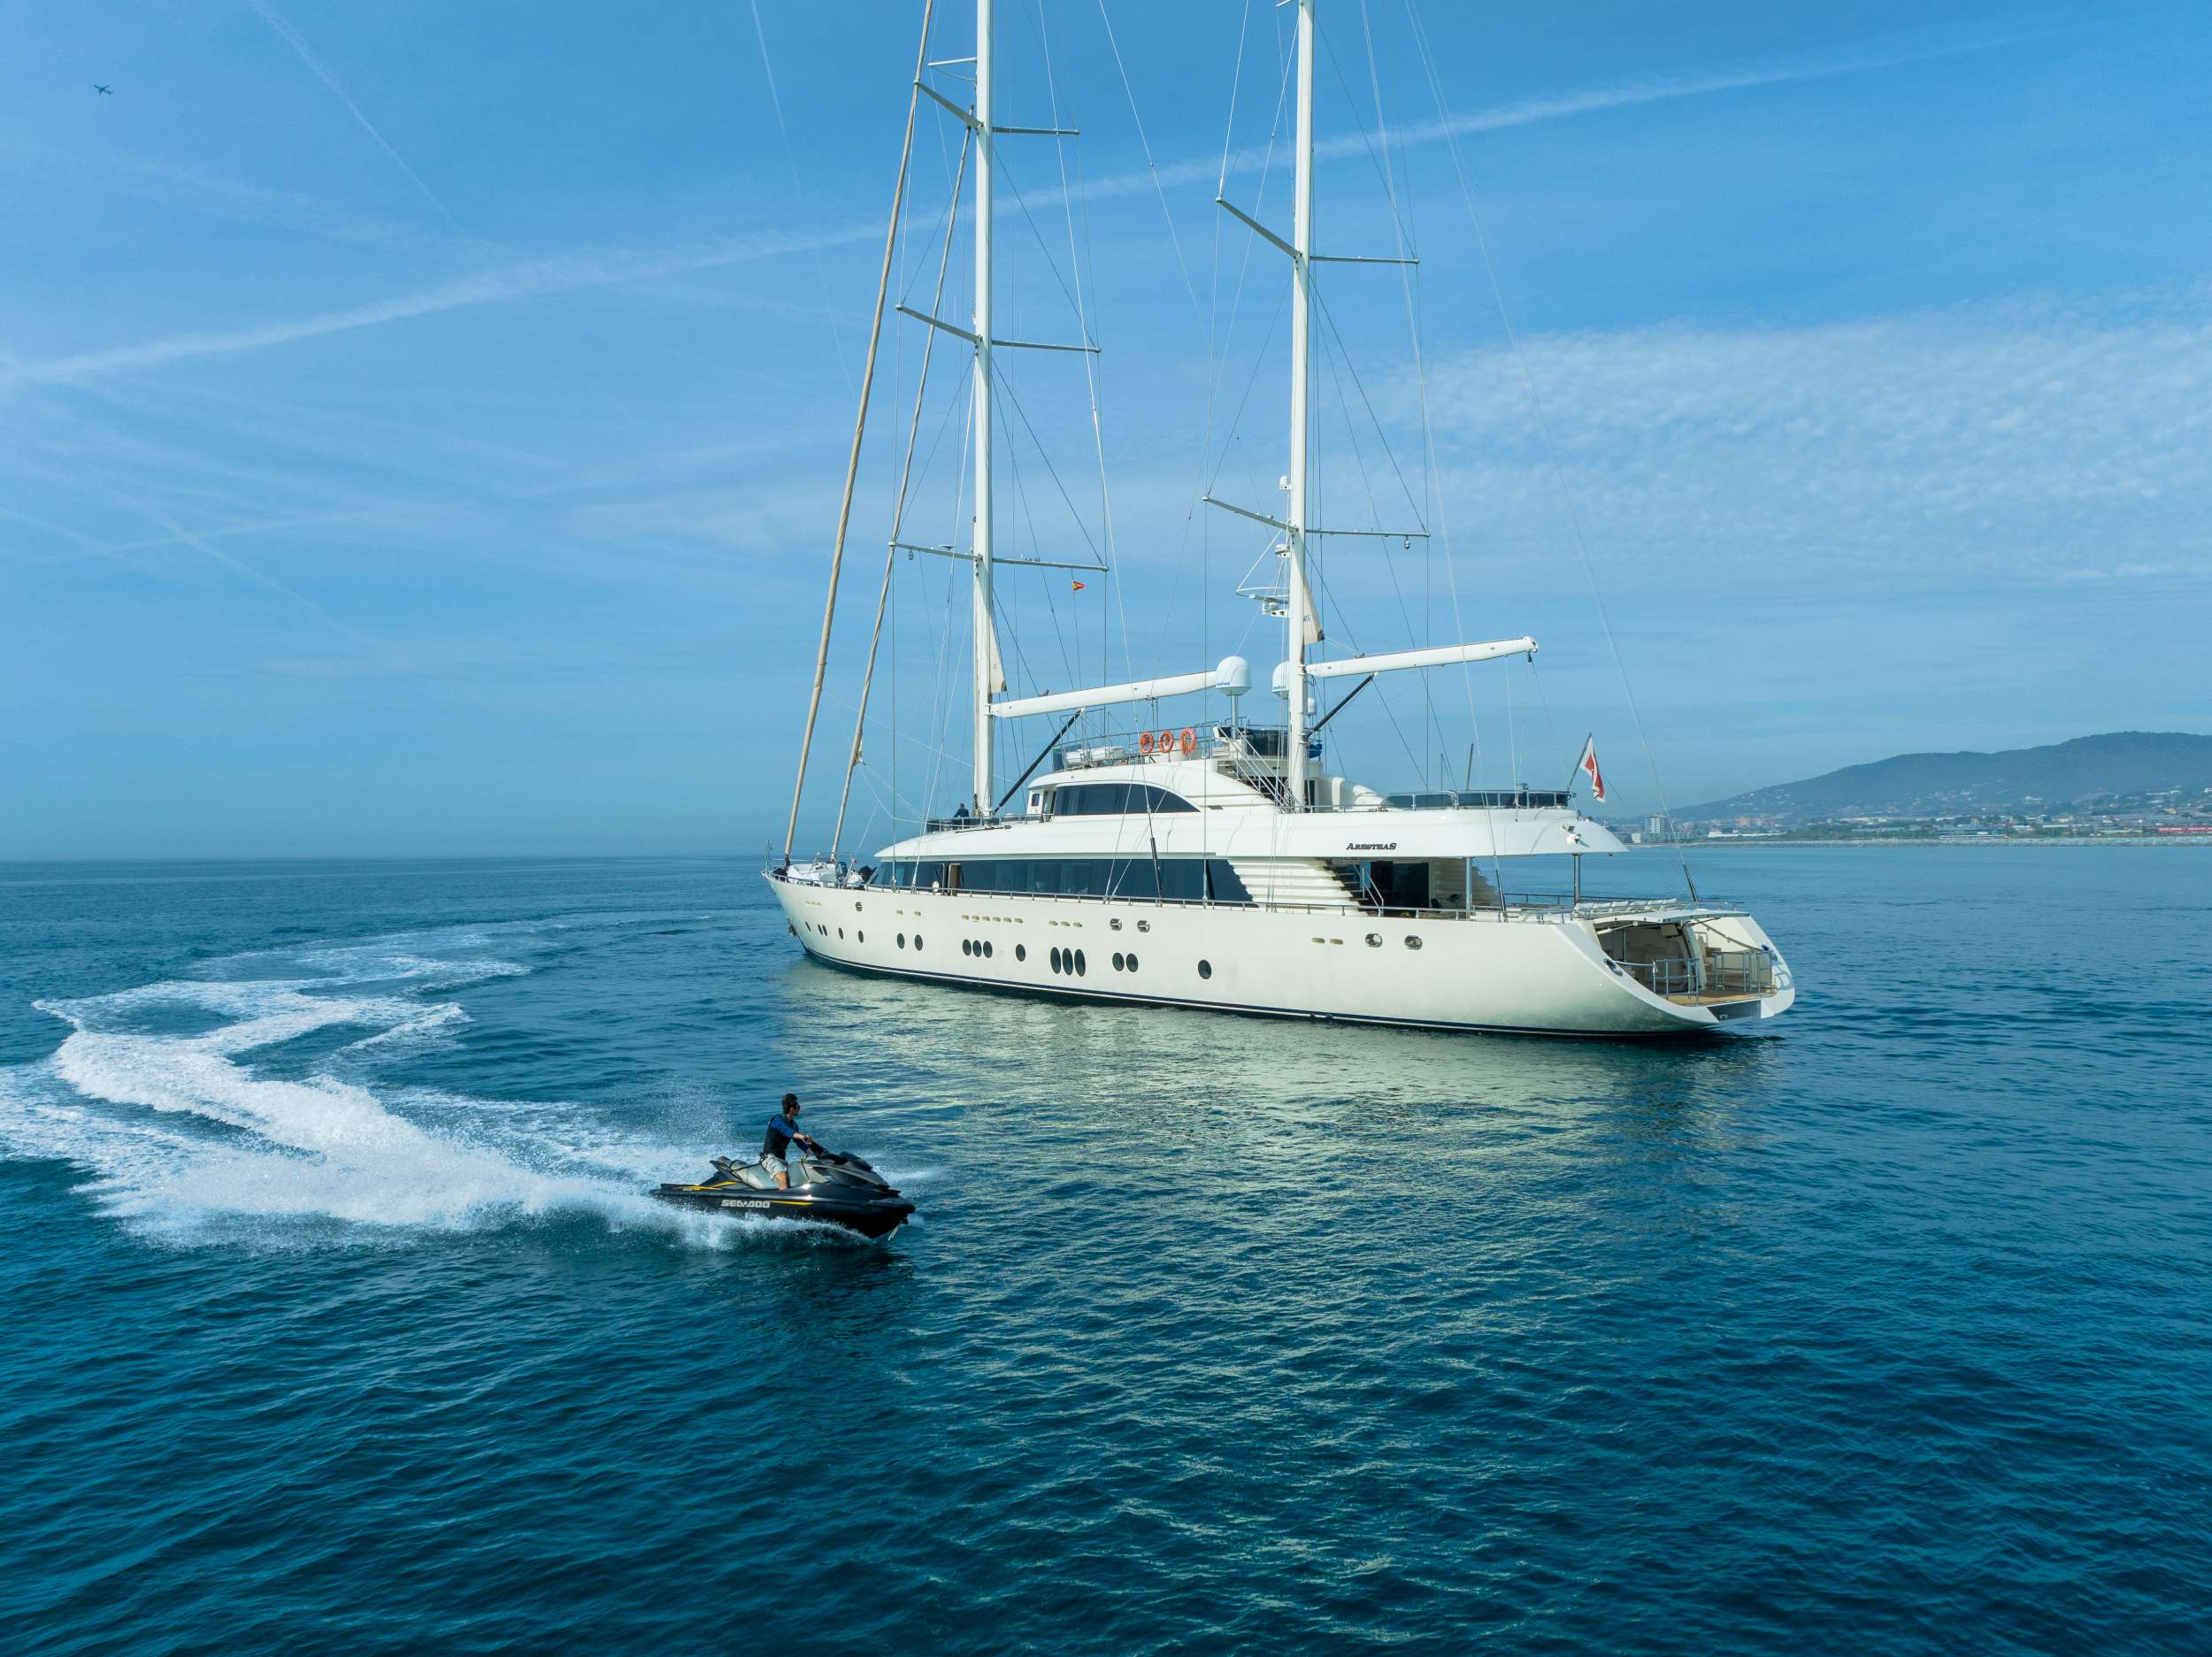 ARESTEAS - Luxury yacht charter France & Boat hire in W. Med -Naples/Sicily, W. Med -Riviera/Cors/Sard., W. Med - Spain/Balearics 1